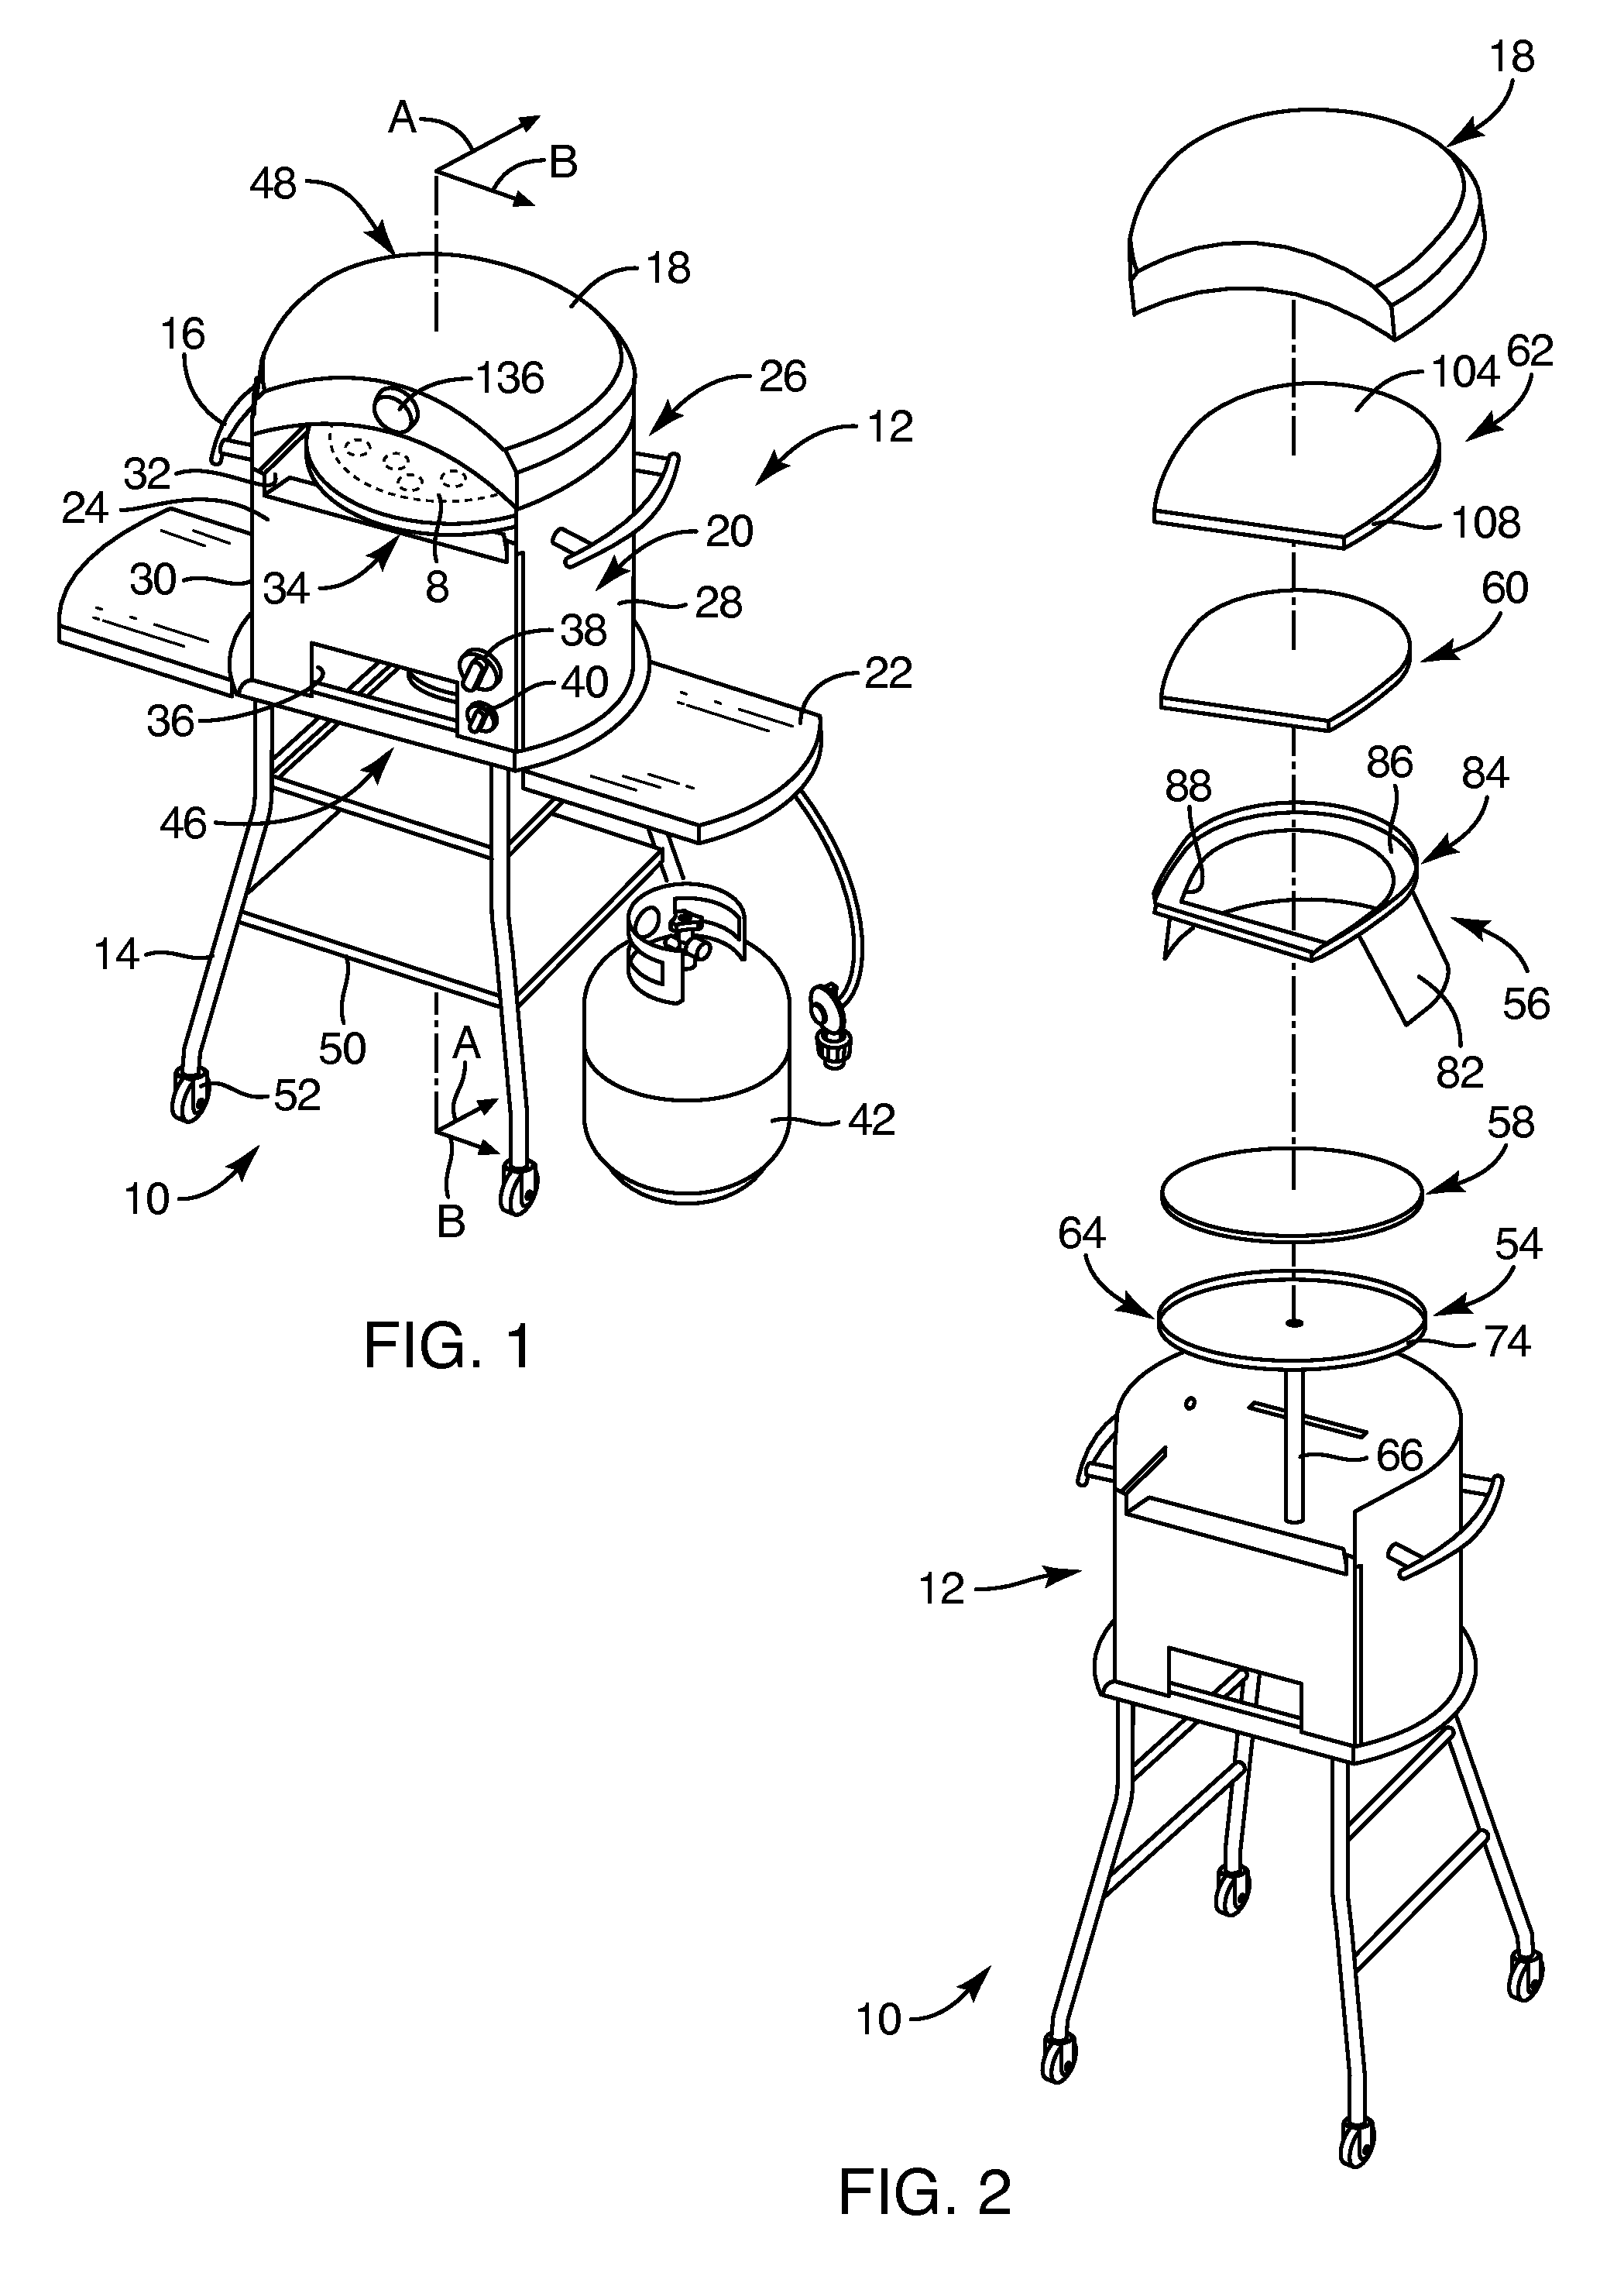 System, device, and method for baking a food product